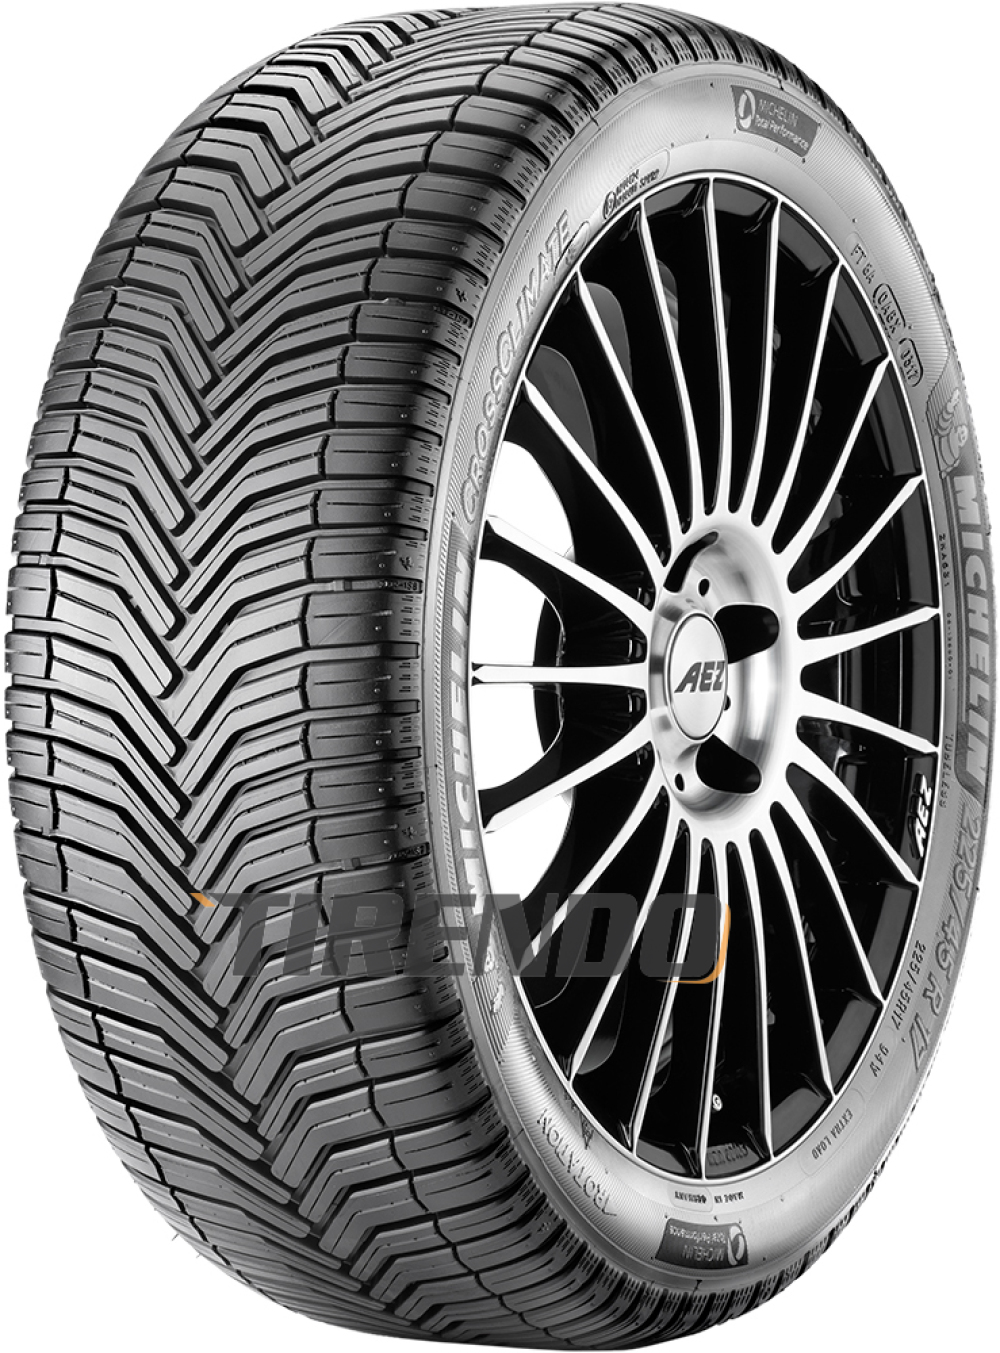 Image of Michelin CrossClimate ( 195/65 R15 95V XL )